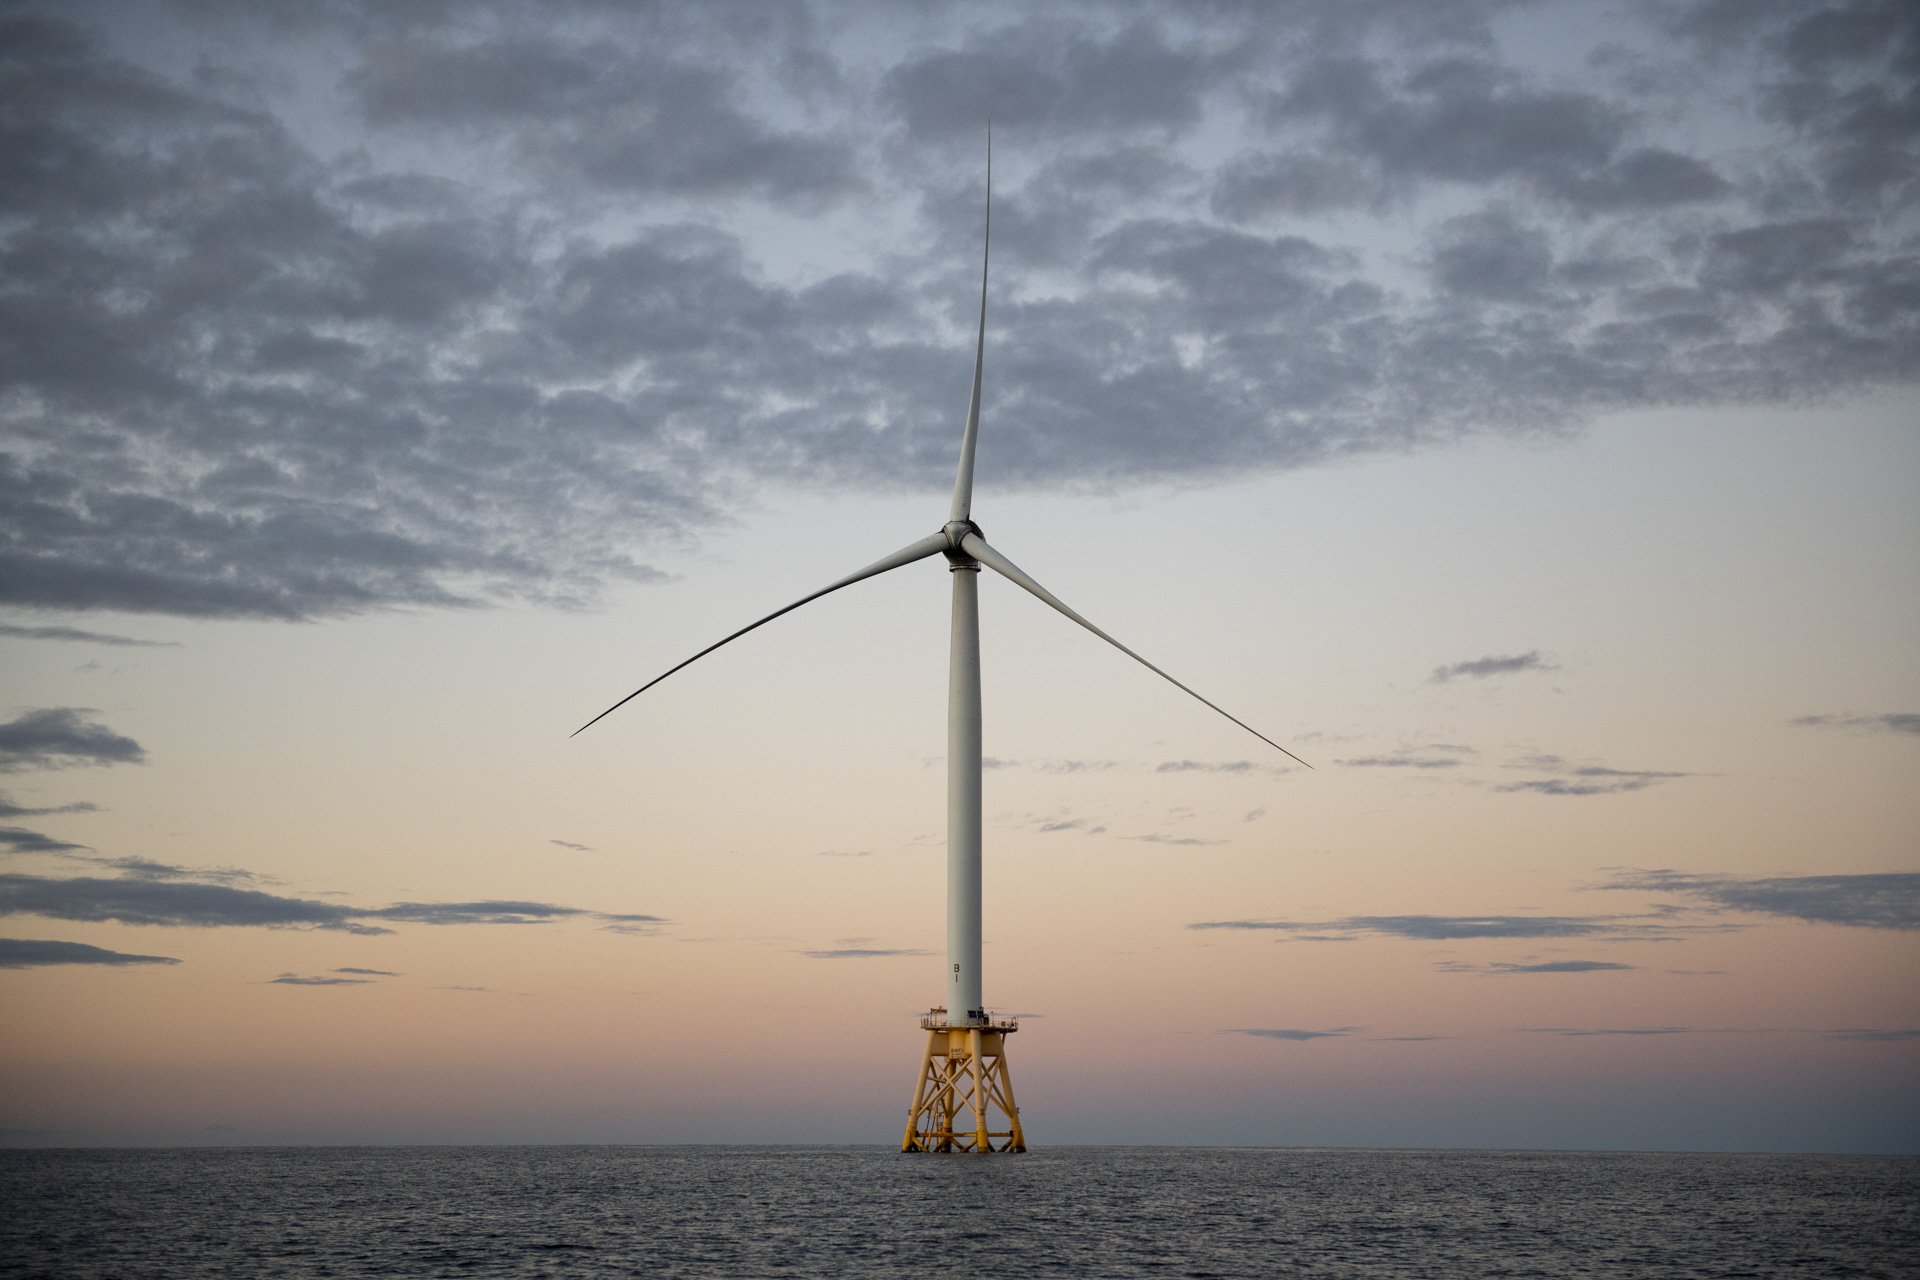 Wind turbine during sunset. Block Island Wind Farm is the first commercial offshore wind farm in the United States, located 3.8 miles (6.1 km) from Block Island, Rhode Island in the Atlantic Ocean. The five-turbine, 30 MW project was developed by Deepwater Wind. Construction began in 2015 and in late summer 2016 five Alstom Haliade 150-6-MW turbines were erected. Operations were launched in December 2016. It is the largest project using wind power in Rhode Island, USA.